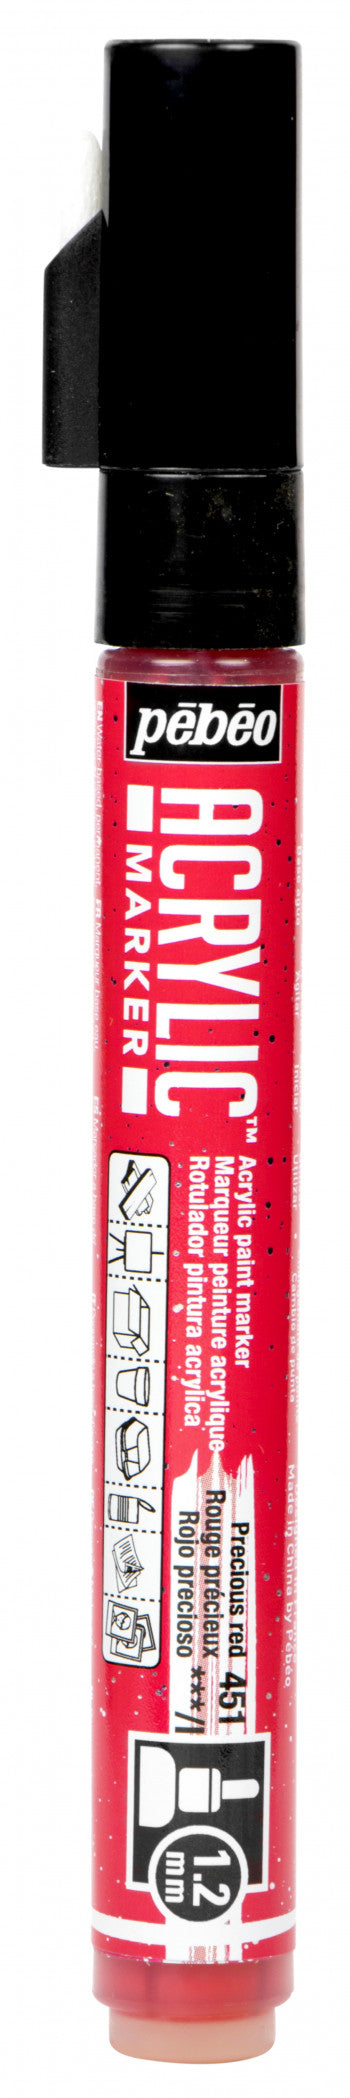 Acrylic Marker 1.2mm Pebeo      Rouge précieux - 451